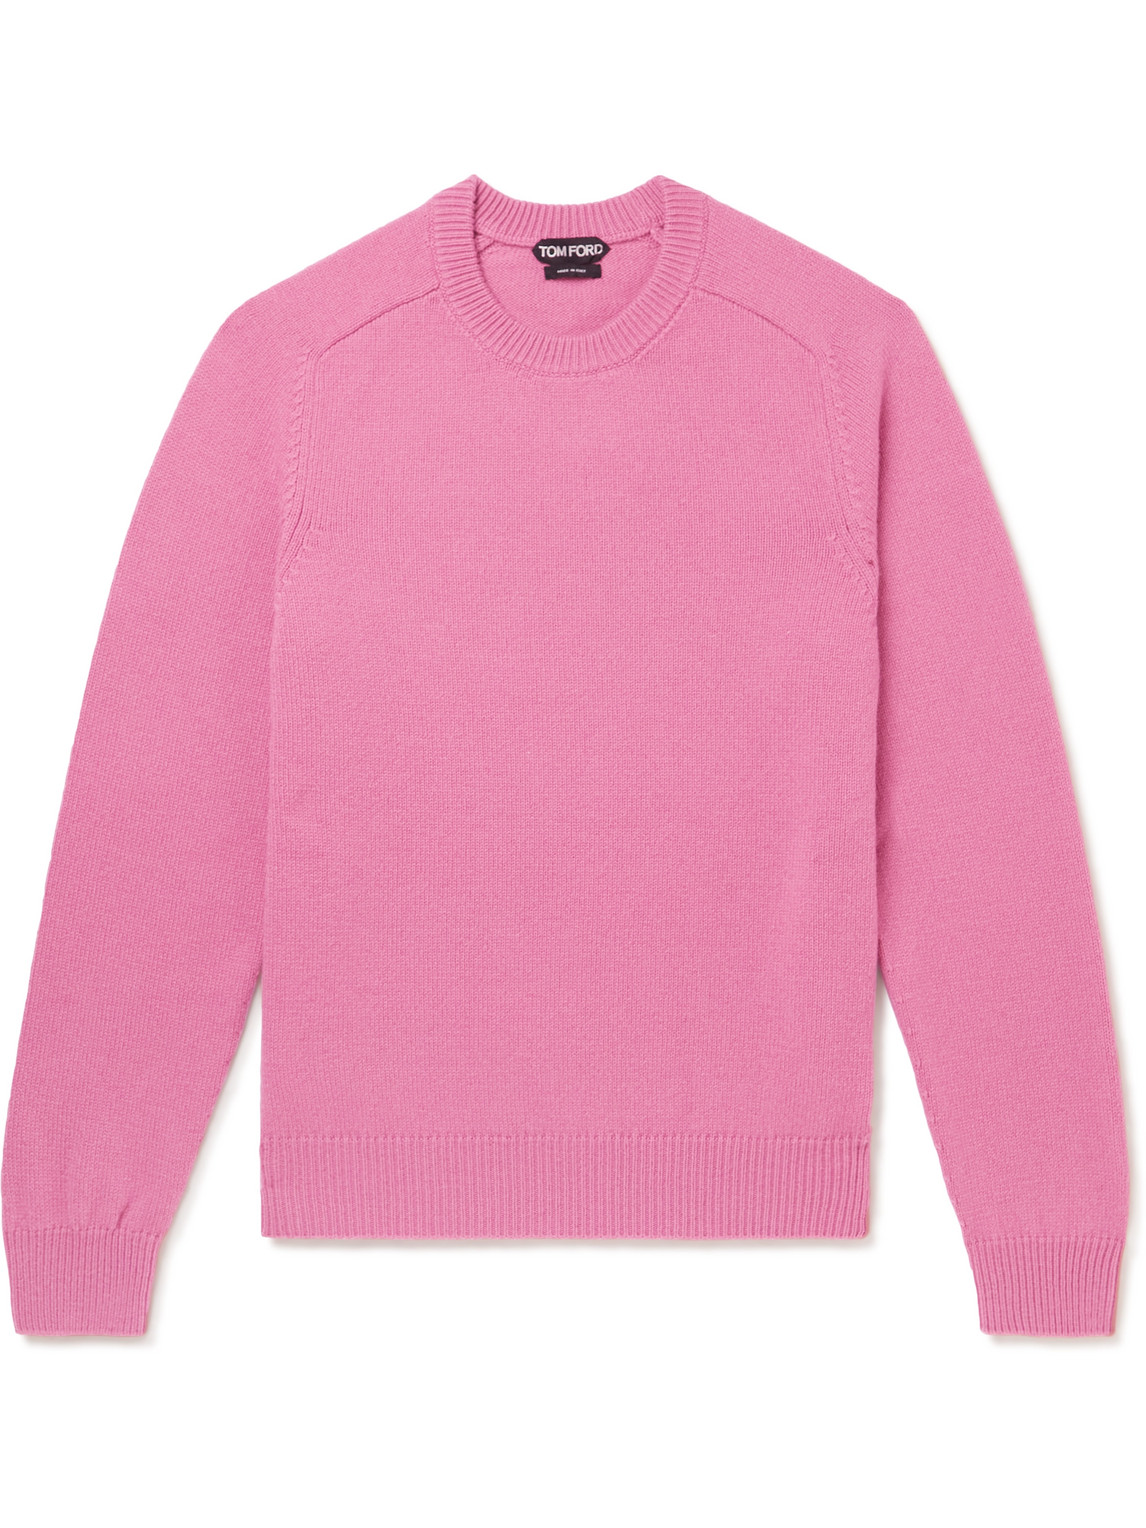 Tom Ford Cashmere Sweater In Pink